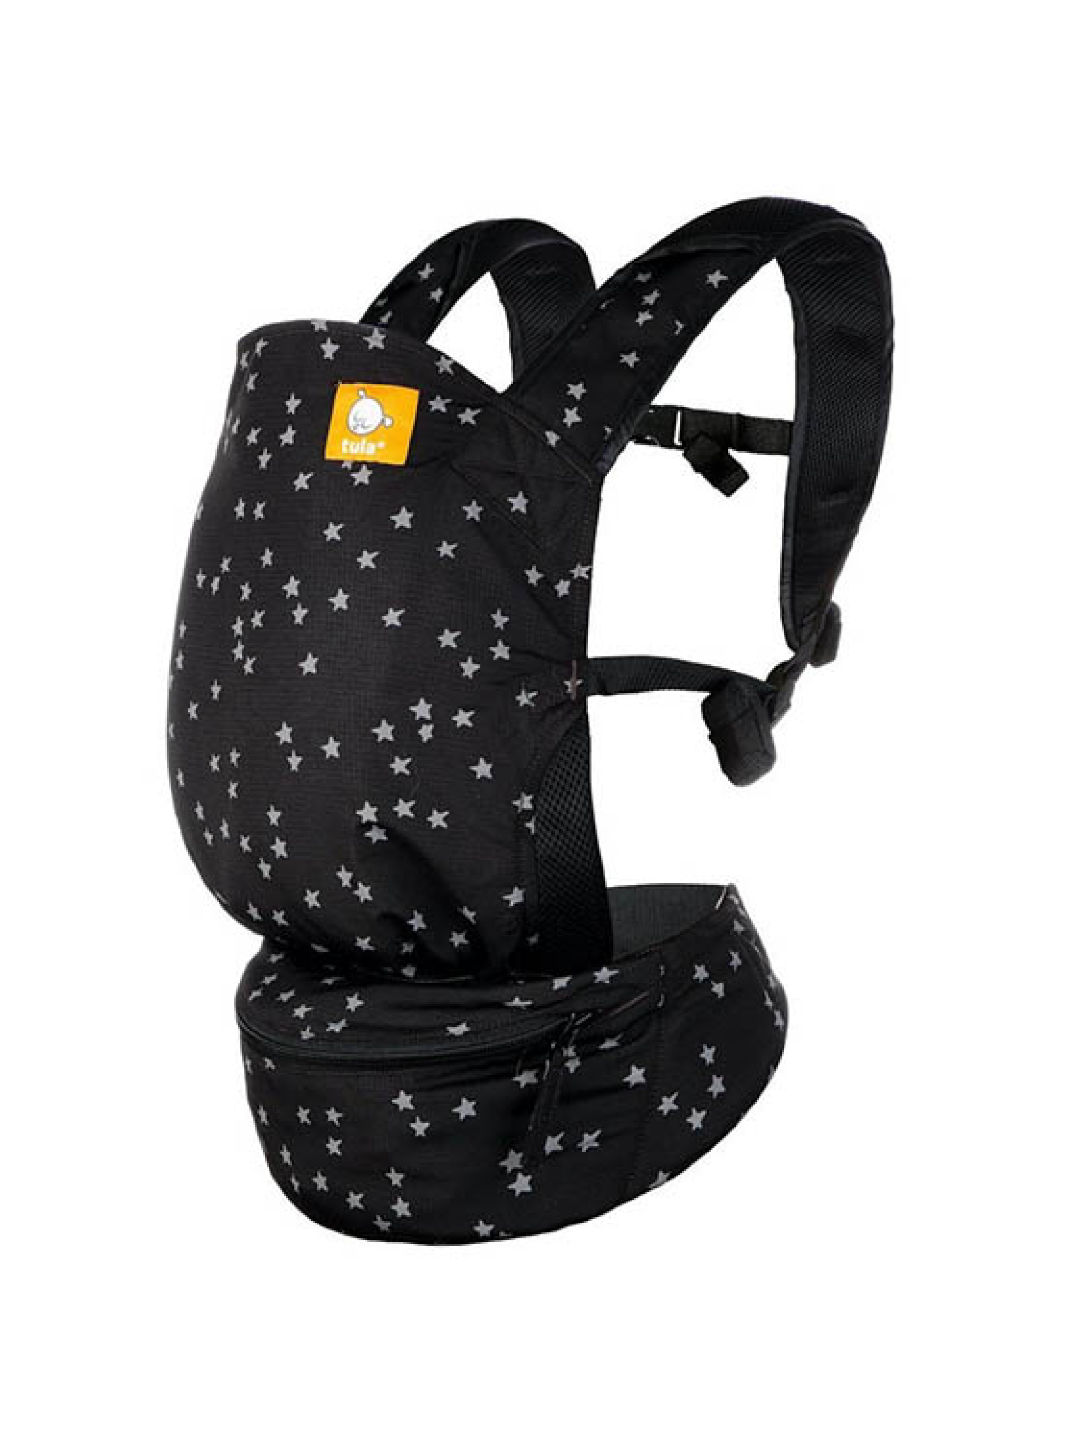 Tula Discover Lite Carrier